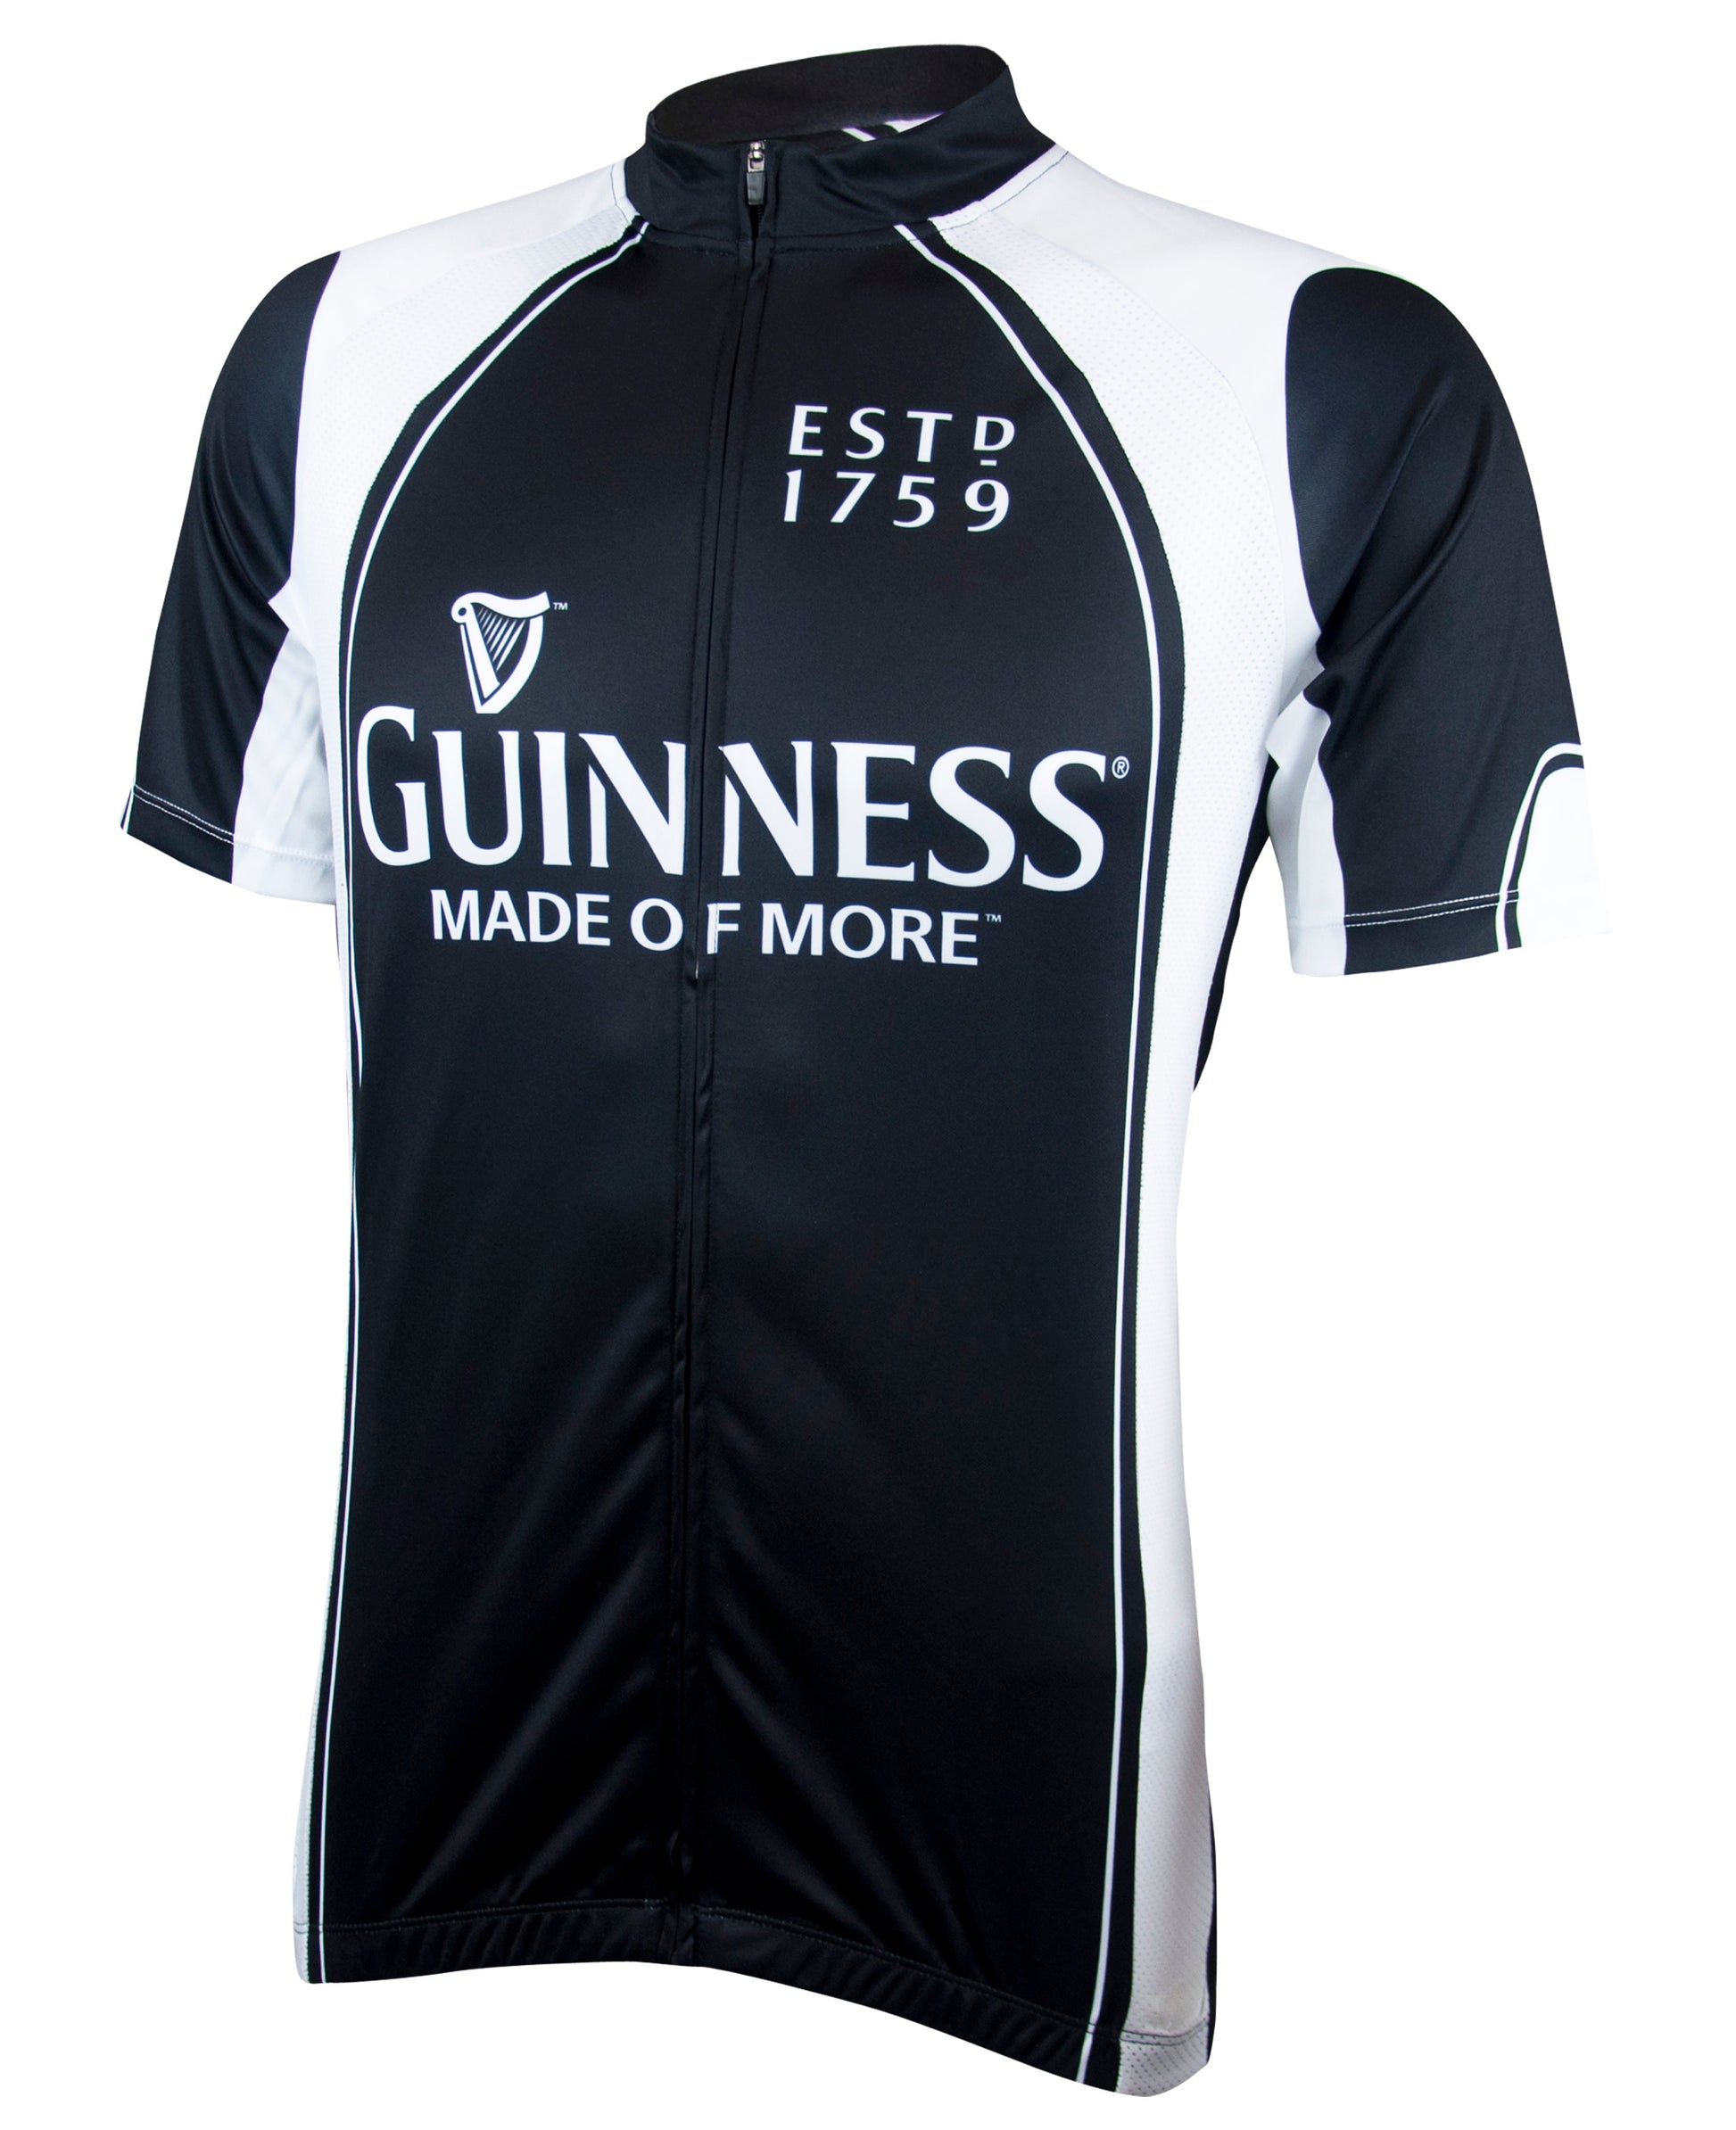 Experience the ultimate performance of the race-cut Guinness Cycling Jersey by Guinness UK.